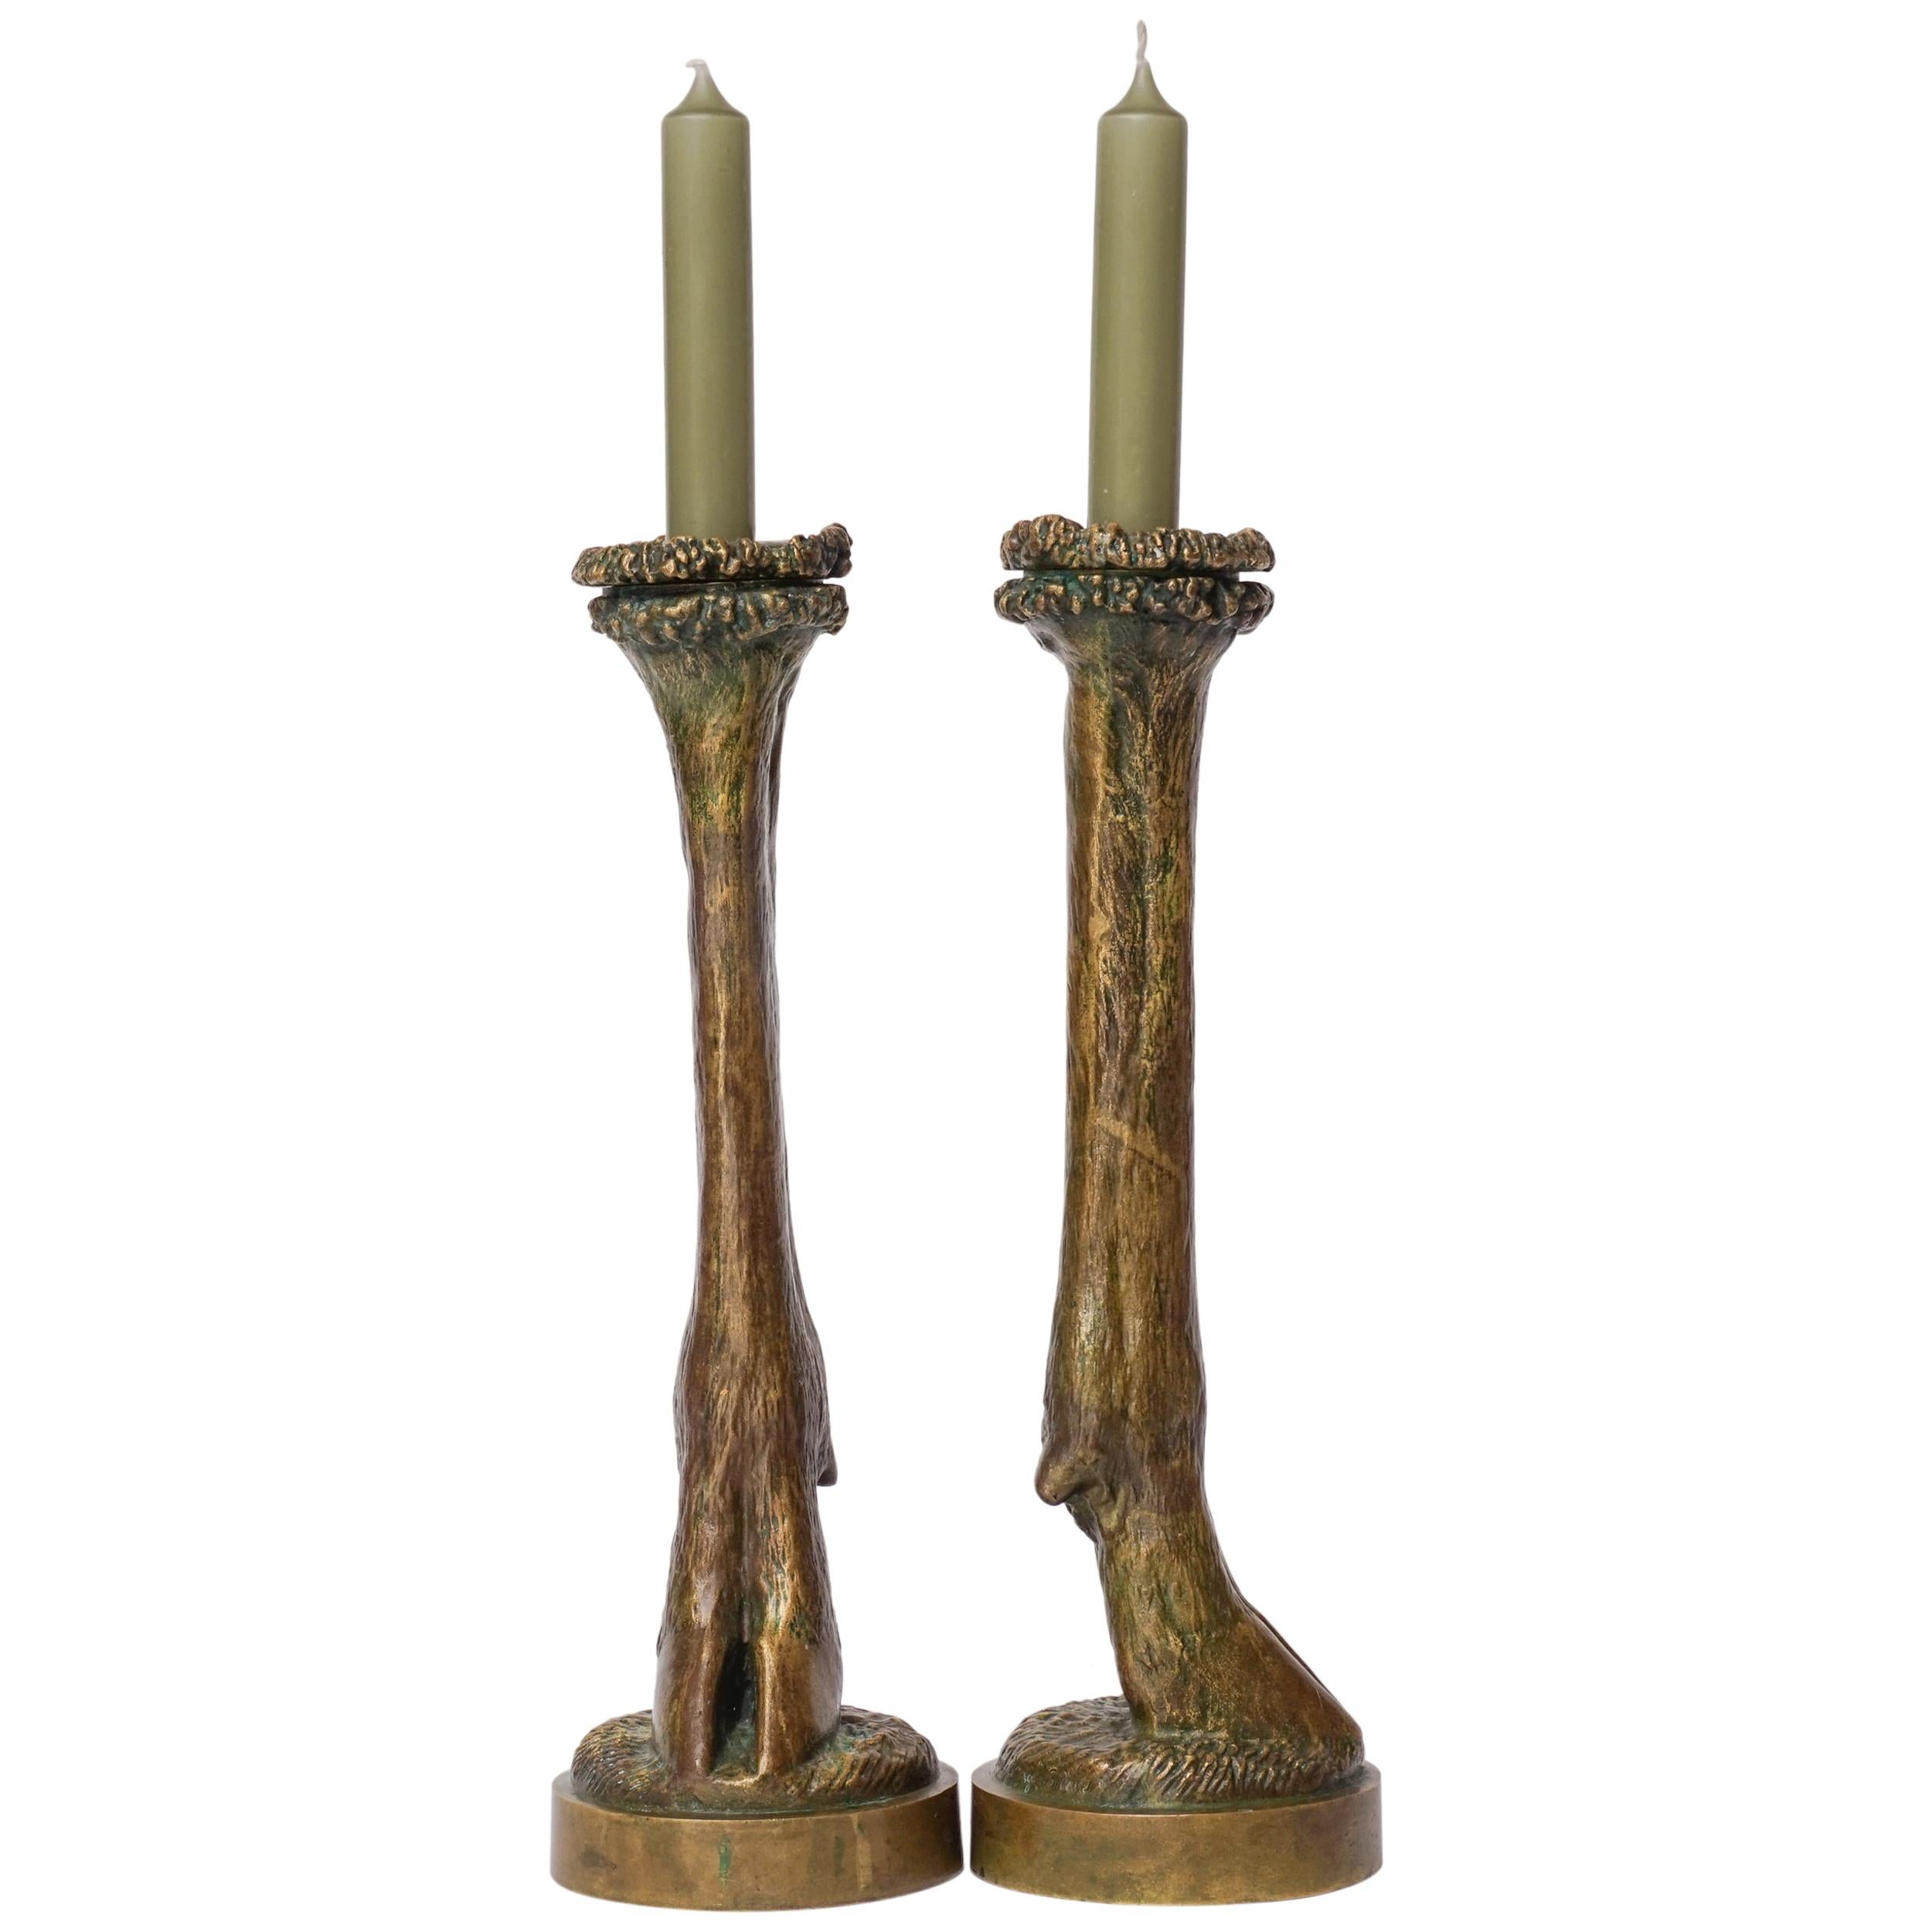 19th Century French Bronze Goat Hoof Candlesticks Cast by Soyer et Ingé Fondeurs For Sale